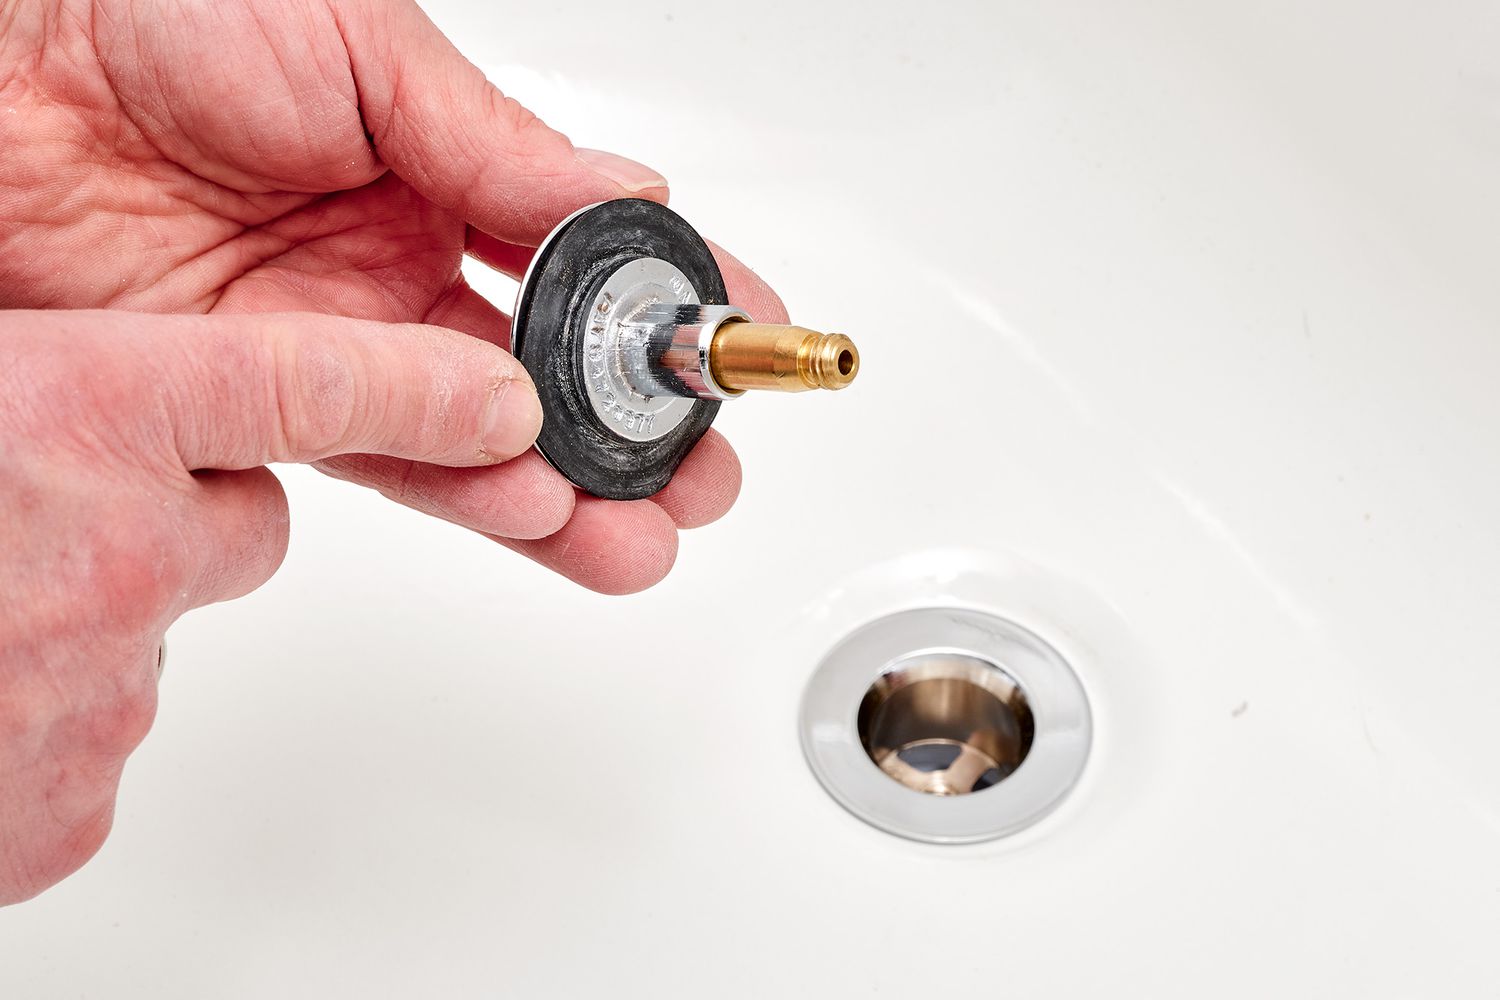 How to Remove a Sink Stopper